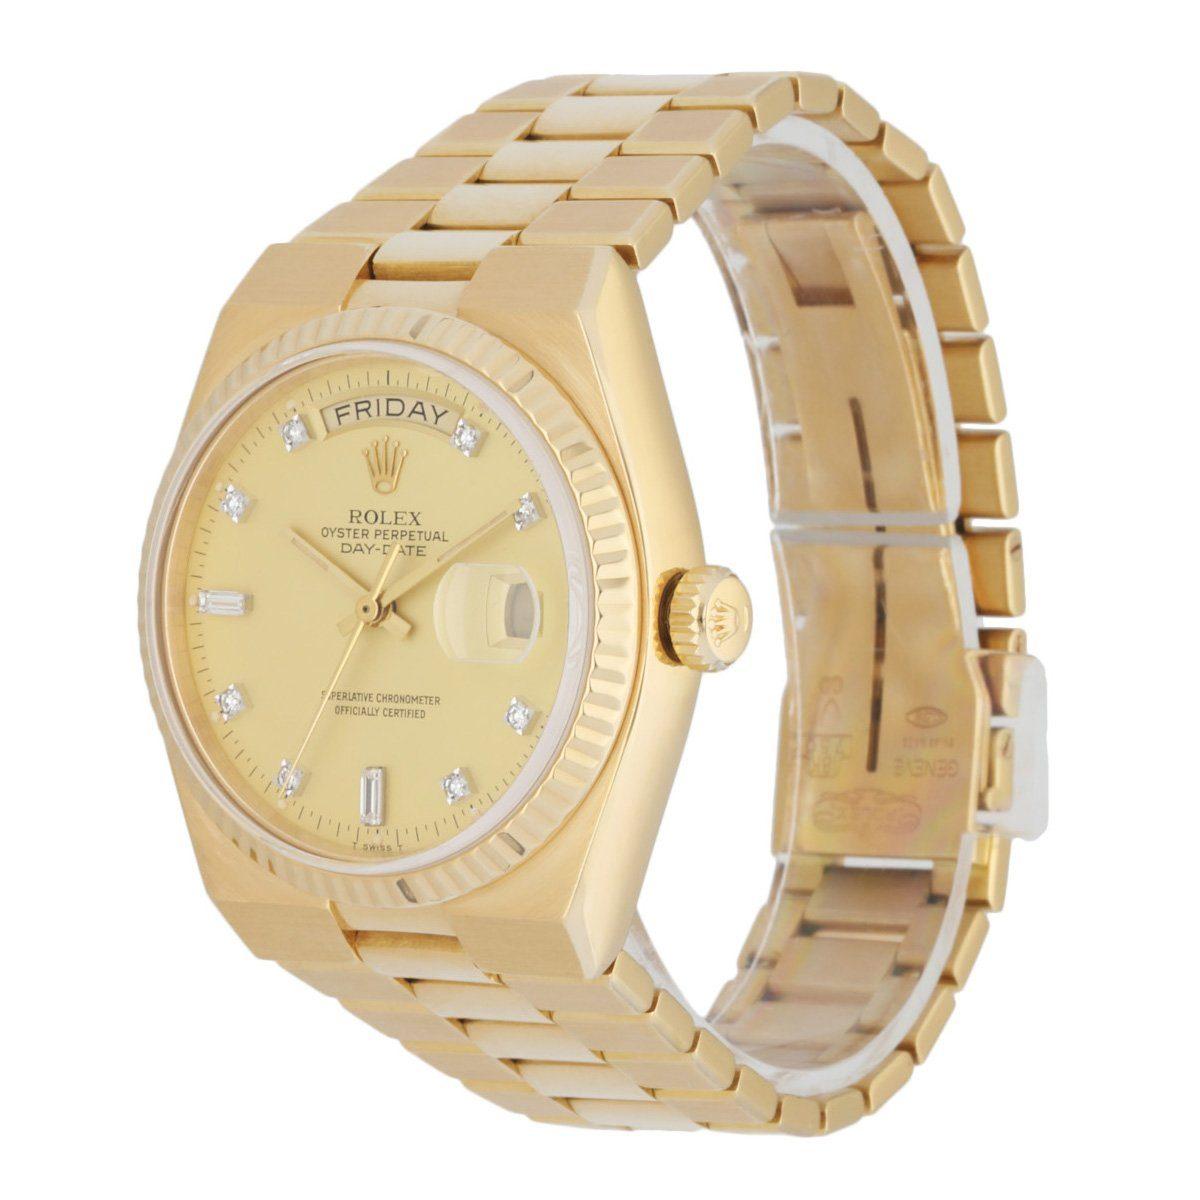 Rolex Oysterquartz president Day date 19018 men's watch. 36MM 18K yellow gold case with 18K yellow gold fluted bezel. Champagne dial with gold hands andÂ factory diamond set hour marker. Date display at 3 o'clock; day display at 12 o'clock position.